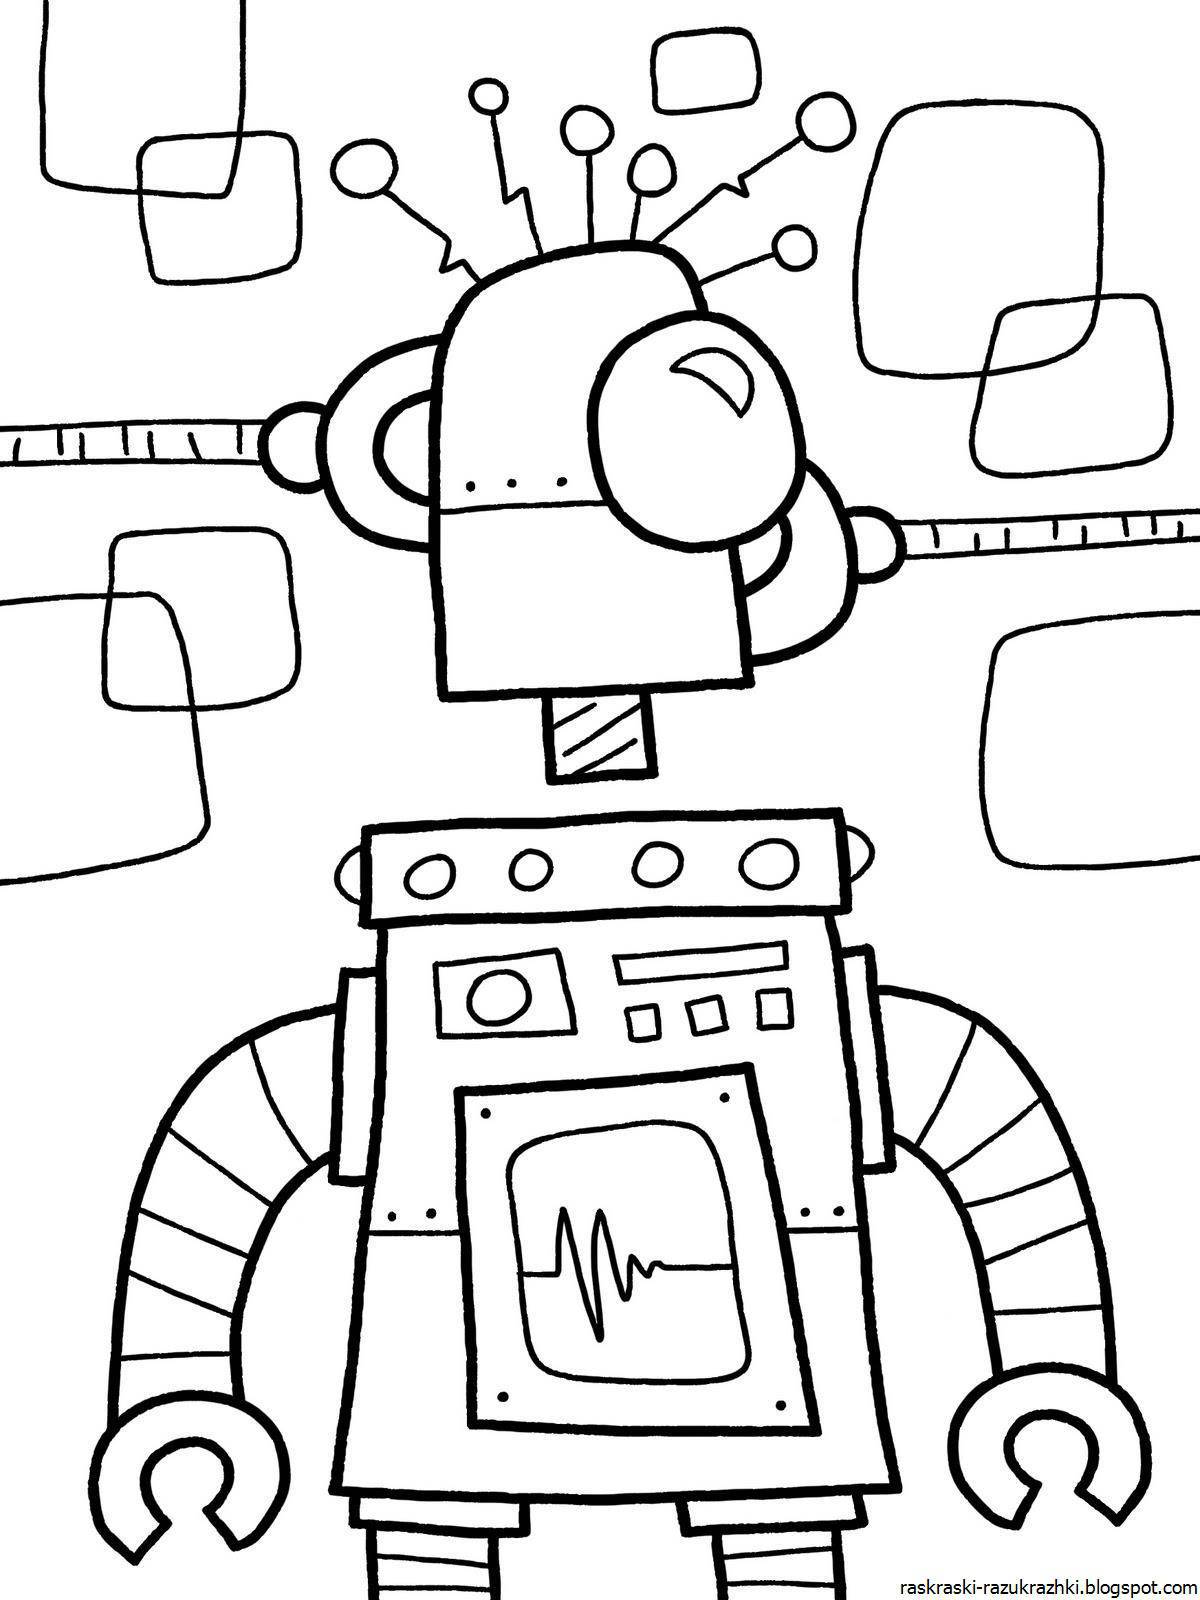 Colorful robot coloring page